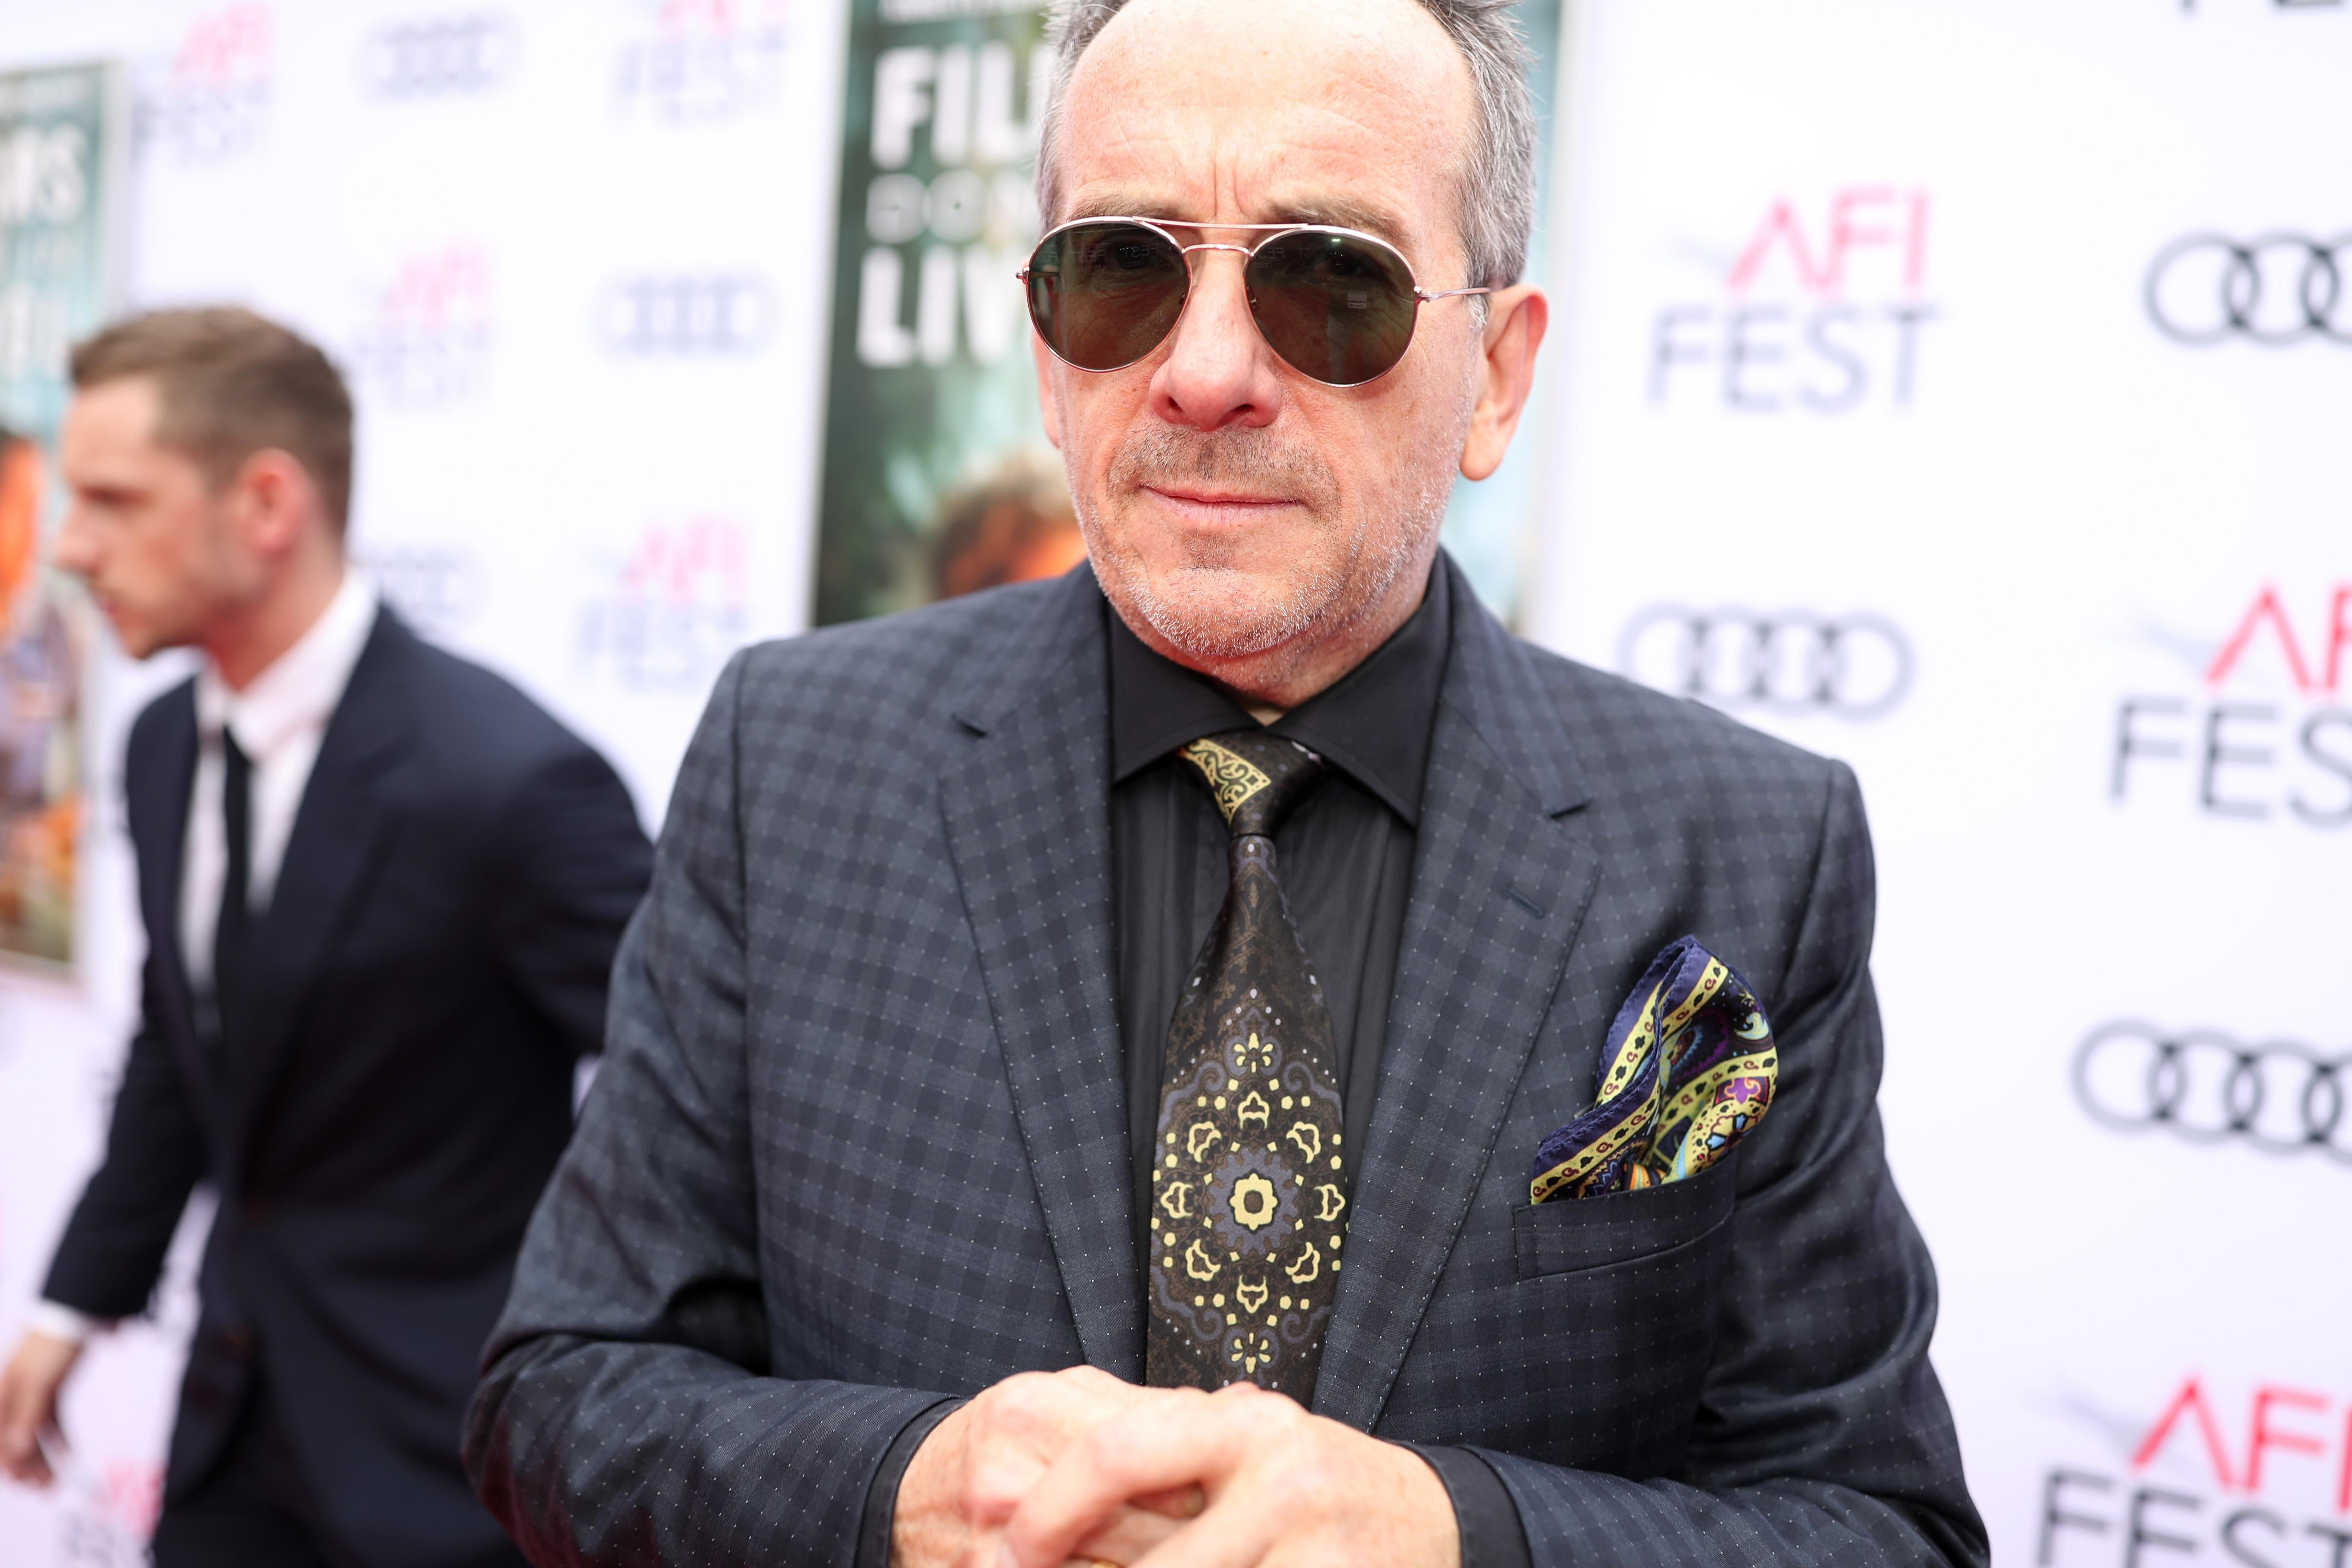 Elvis Costello attends the screening of 'Film Stars Don't Die In Liverpool' at AFI FEST 2017 Presented By Audi at TCL Chinese Theatre on November 12, 2017 in Hollywood, California.